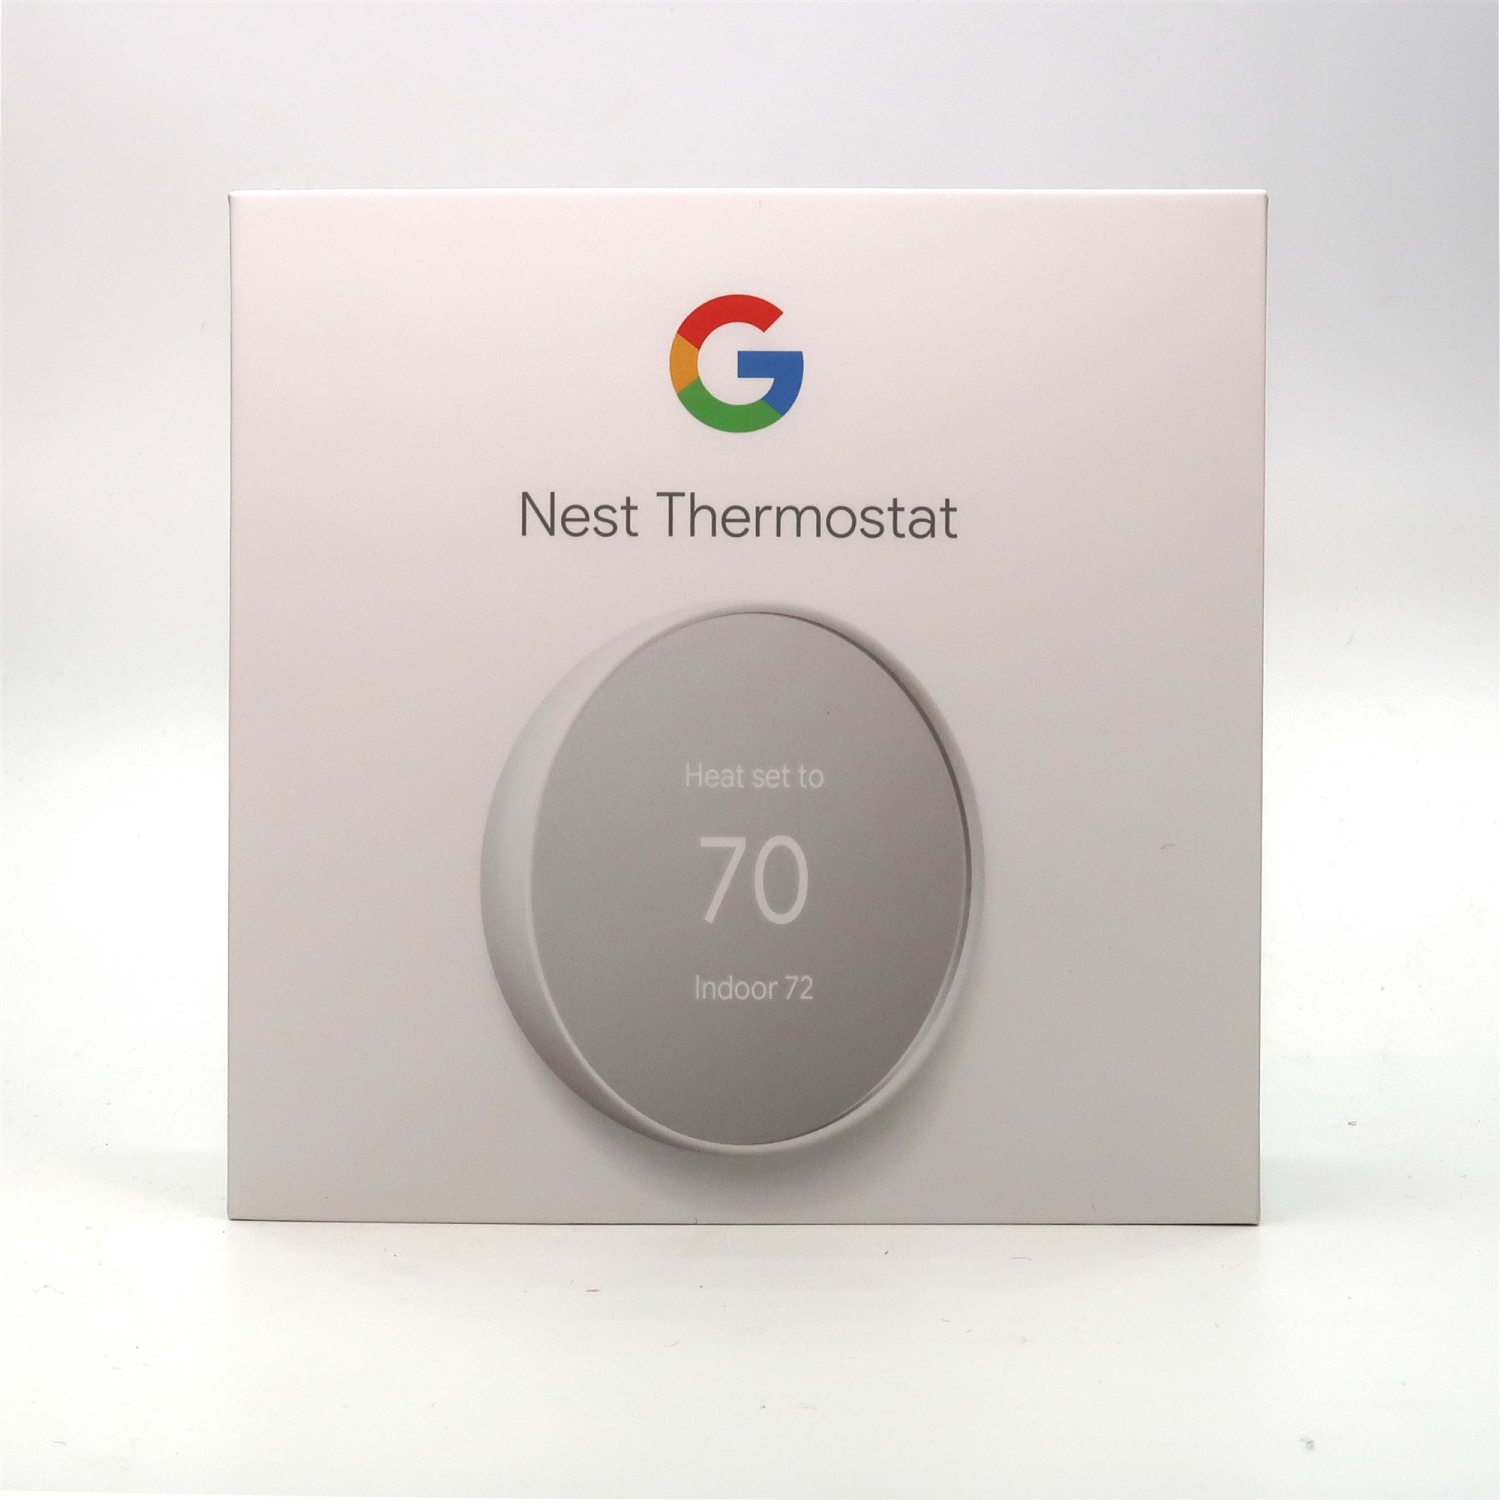 2 Units Google Nest Smart Programmable Wifi Thermostat for Home - Snow - Open Box